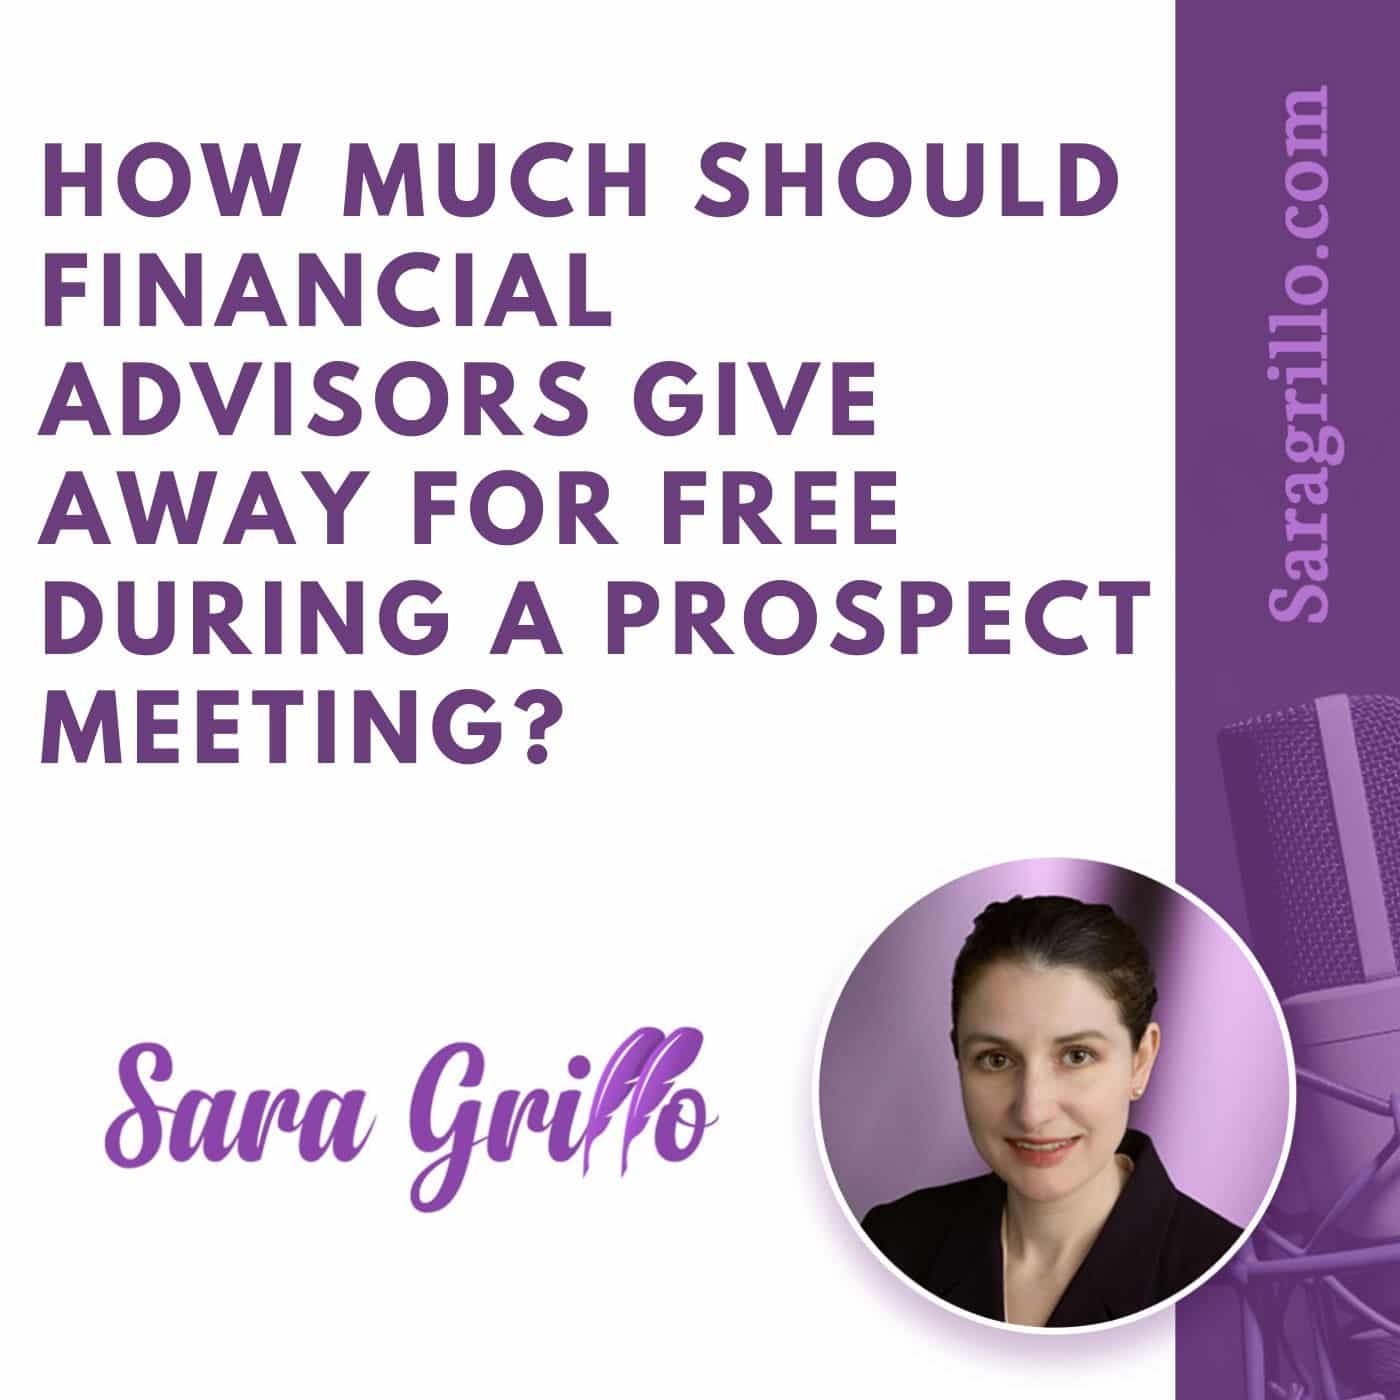 How much should financial advisors give away for free during a prospect meeting?